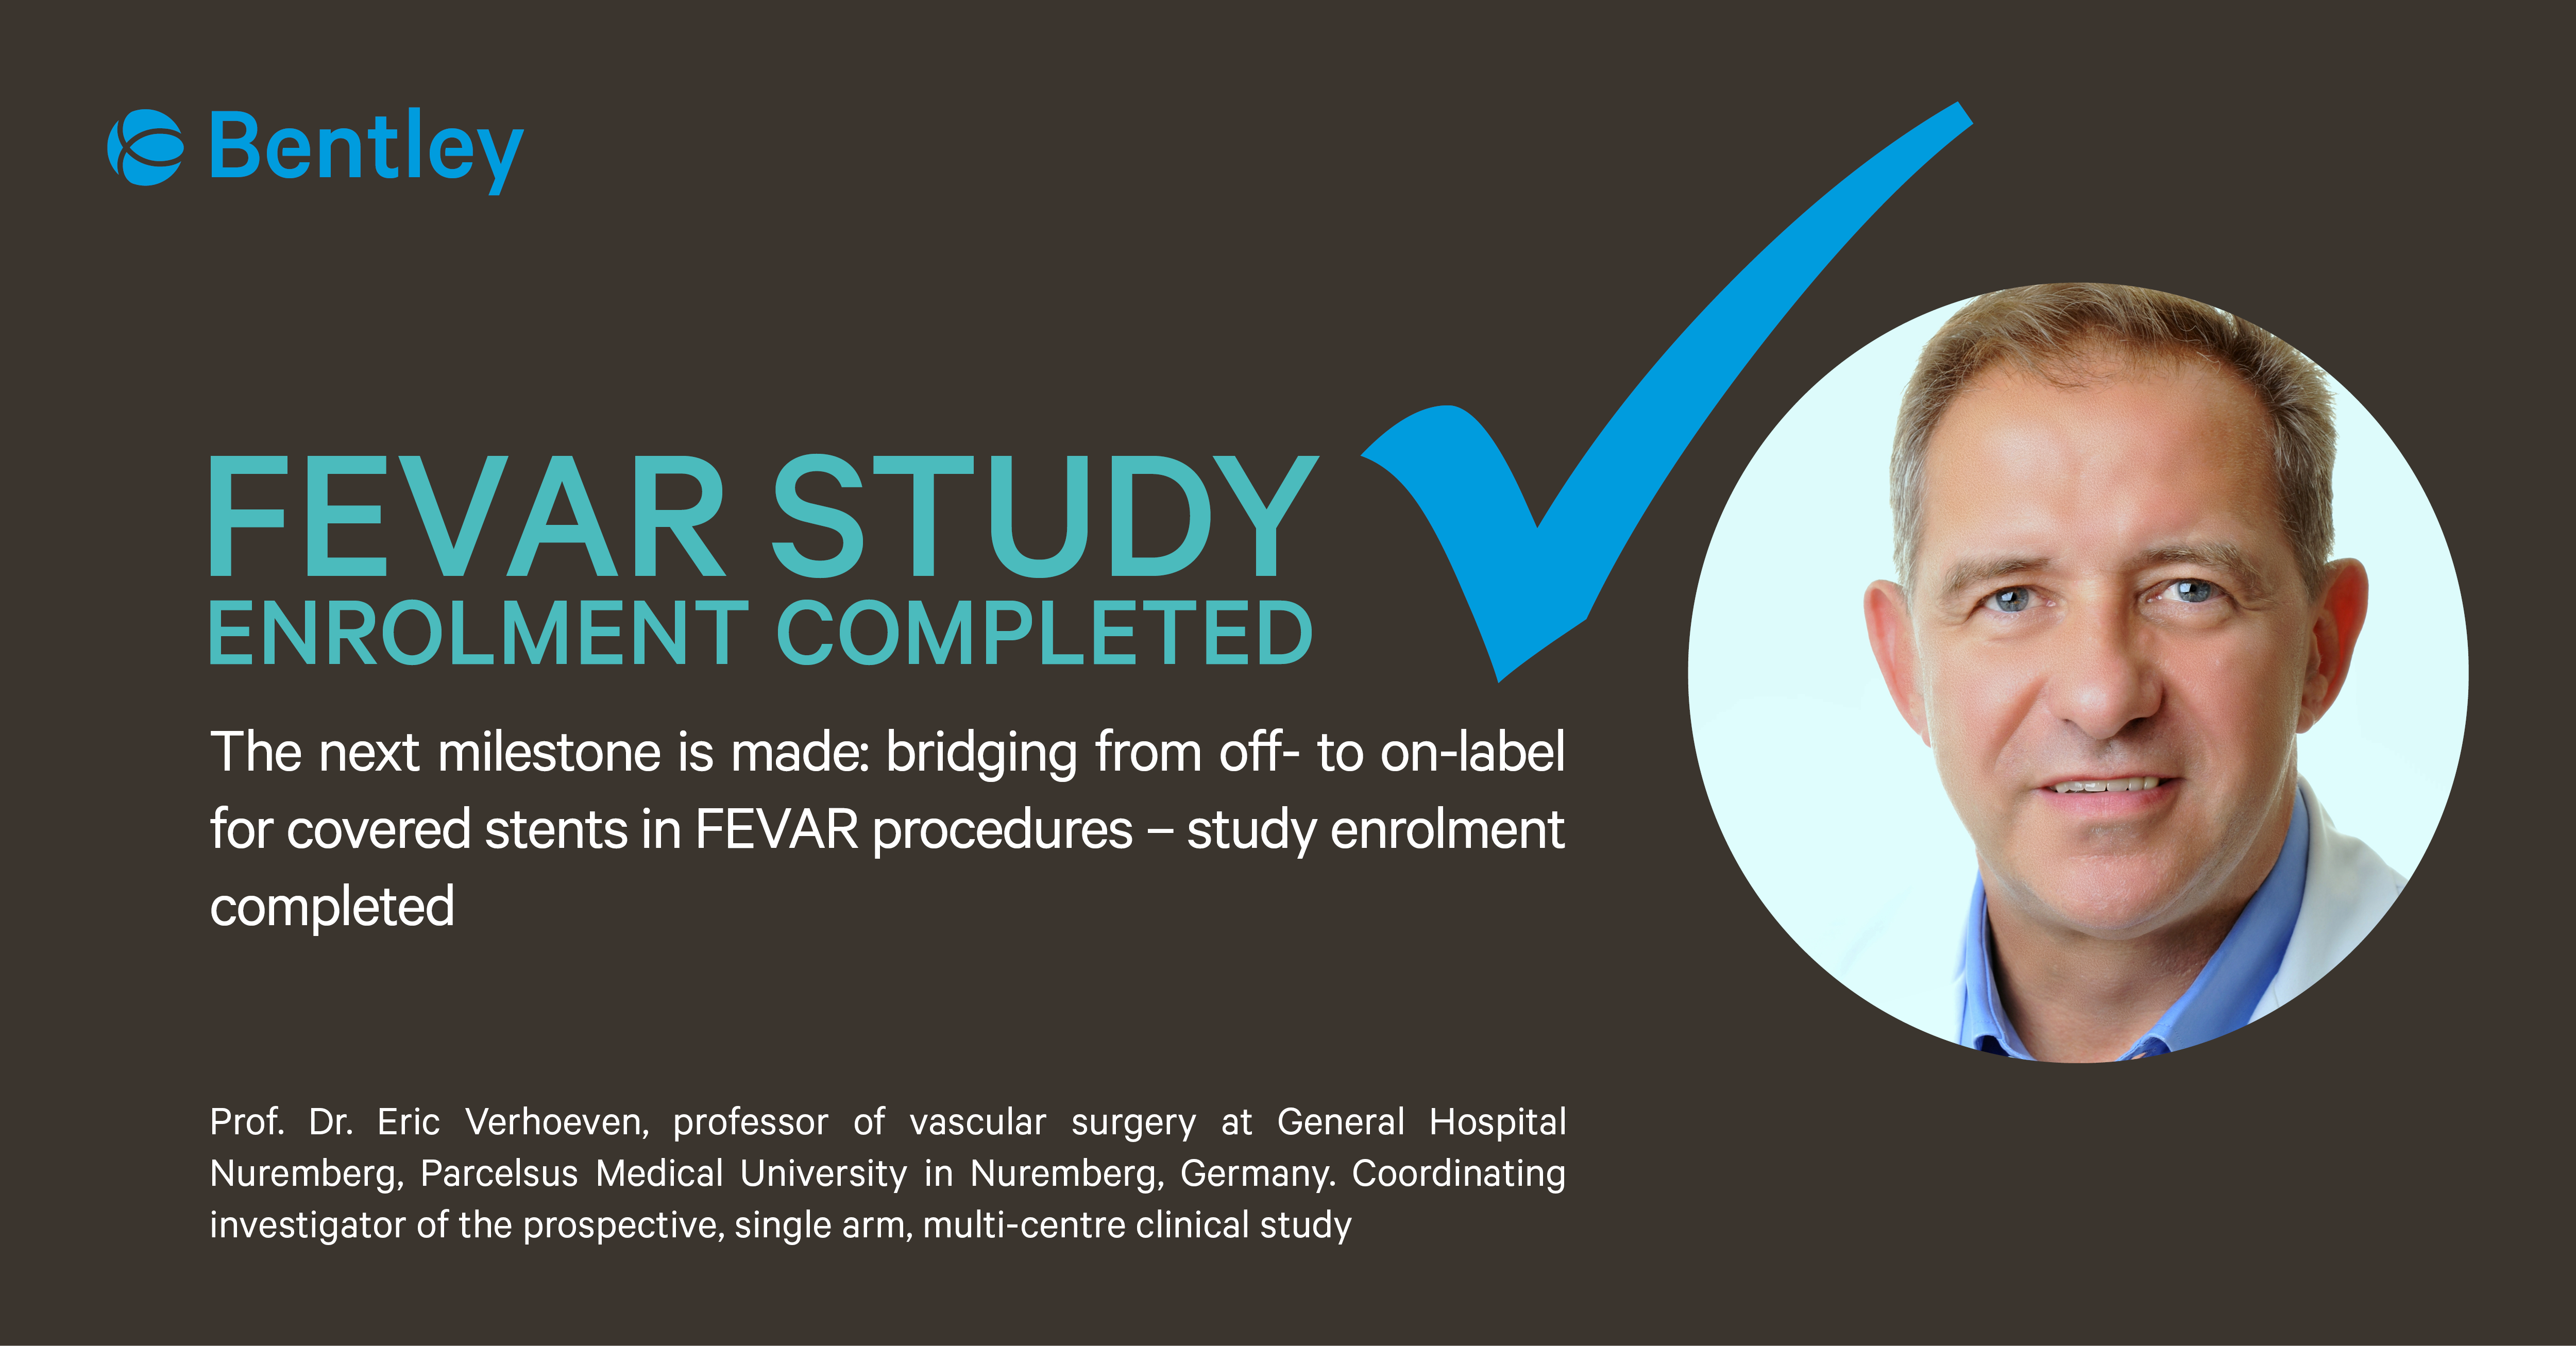 Recruitment complete in FEVAR study for on-label use with Bentley BeGraft as bridging stent